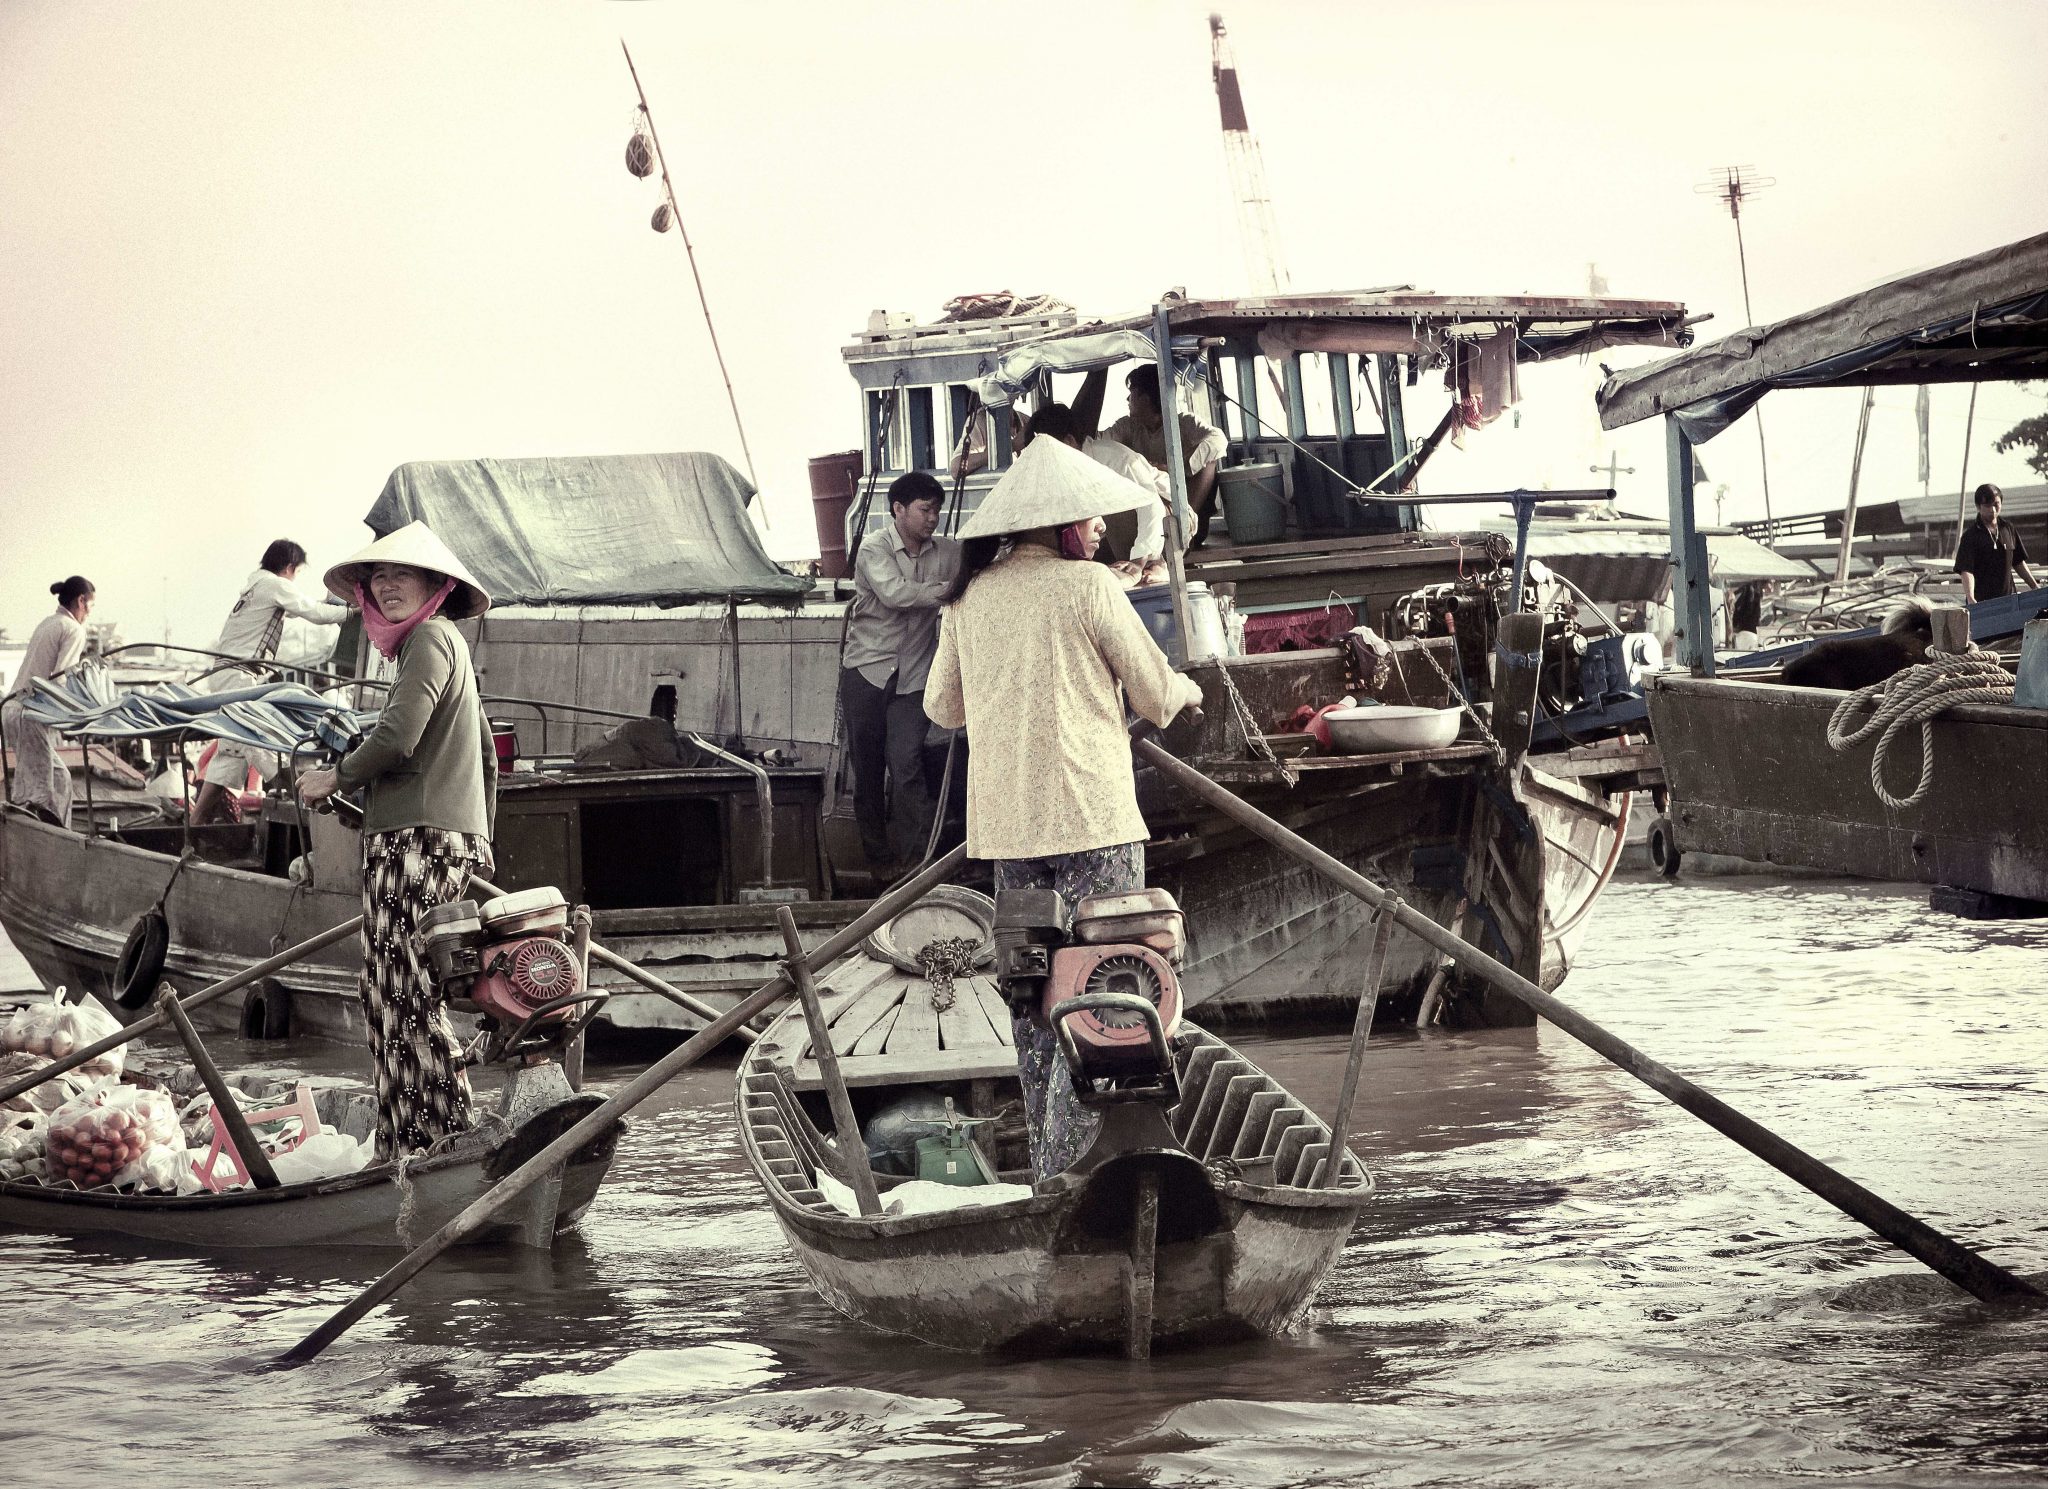 China's Plans for the Mekong River